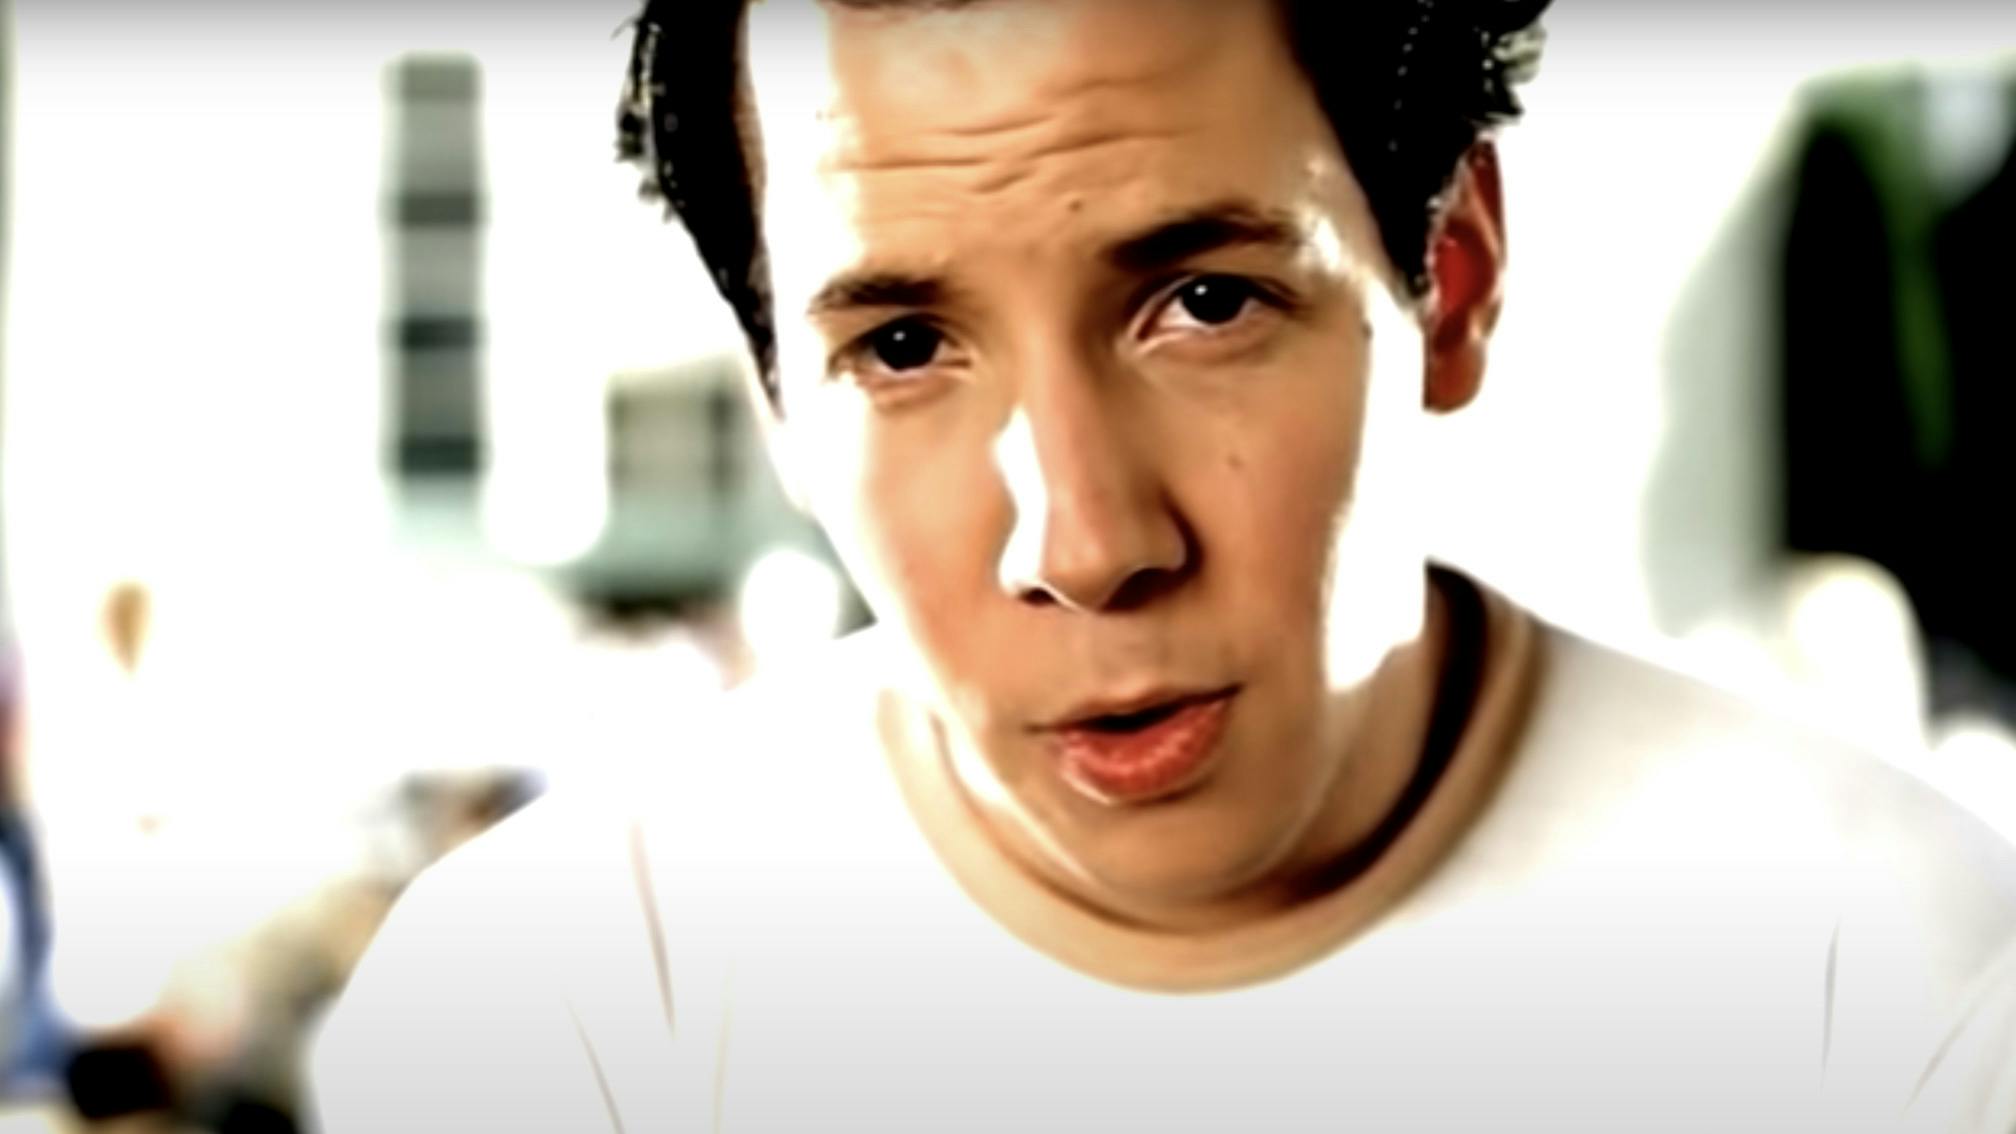 This Simple Plan TikTok Challenge Is Ridiculously Heartwarming